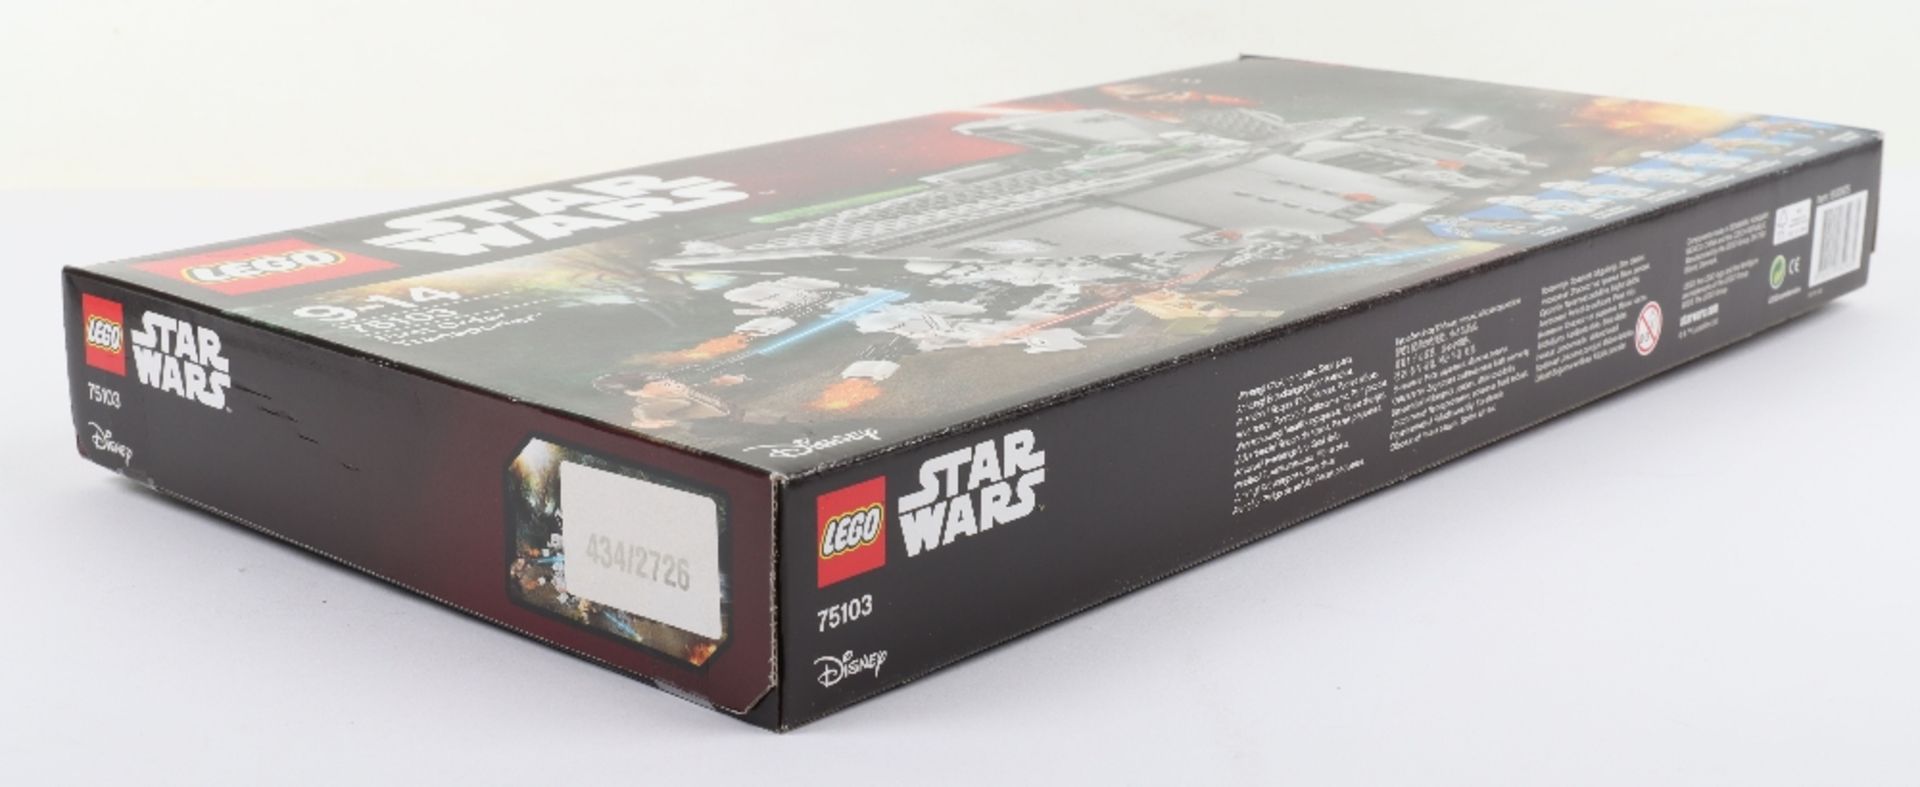 Lego Star Wars 75103 and 5002948 sealed boxed - Image 7 of 11